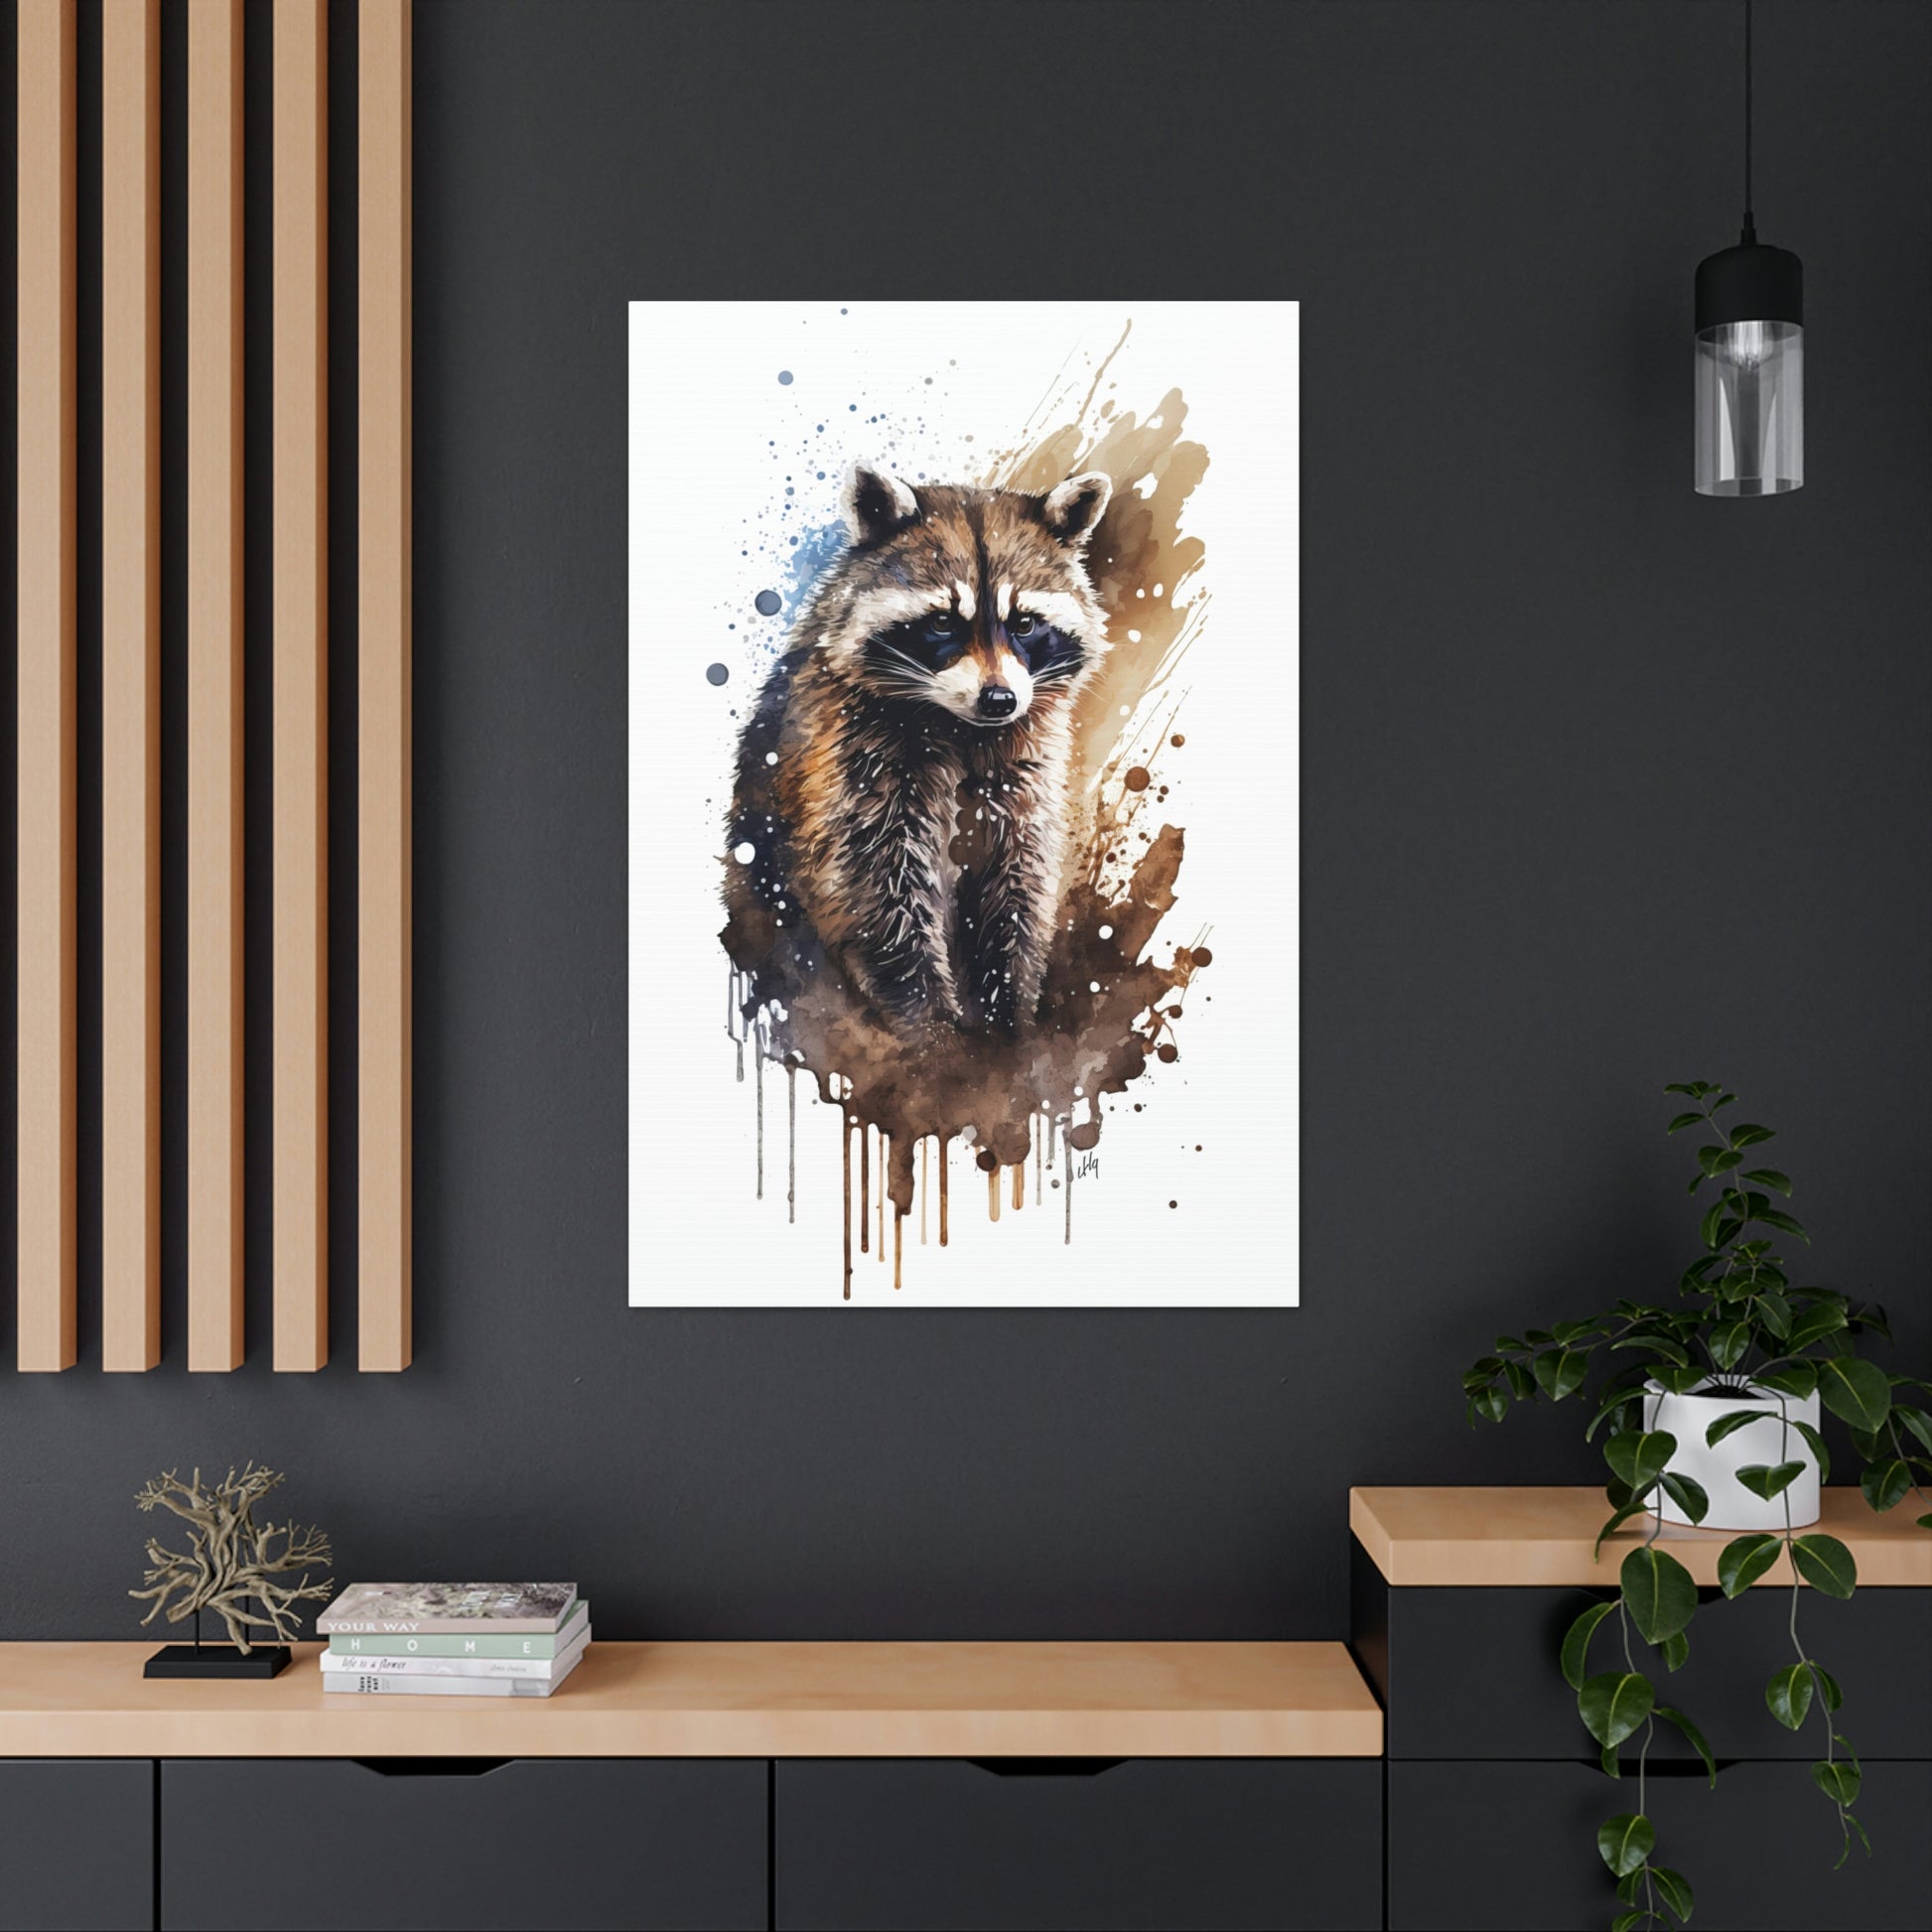 Raccoon Wall Art from the Wildlife Collection elegantly captures the curious and nimble essence of this nocturnal creature on canvas. Perfectly suited for spaces seeking a touch of natural intrigue, this piece offers a harmonious blend of artistry and nature, effortlessly complementing a diverse range of interiors.